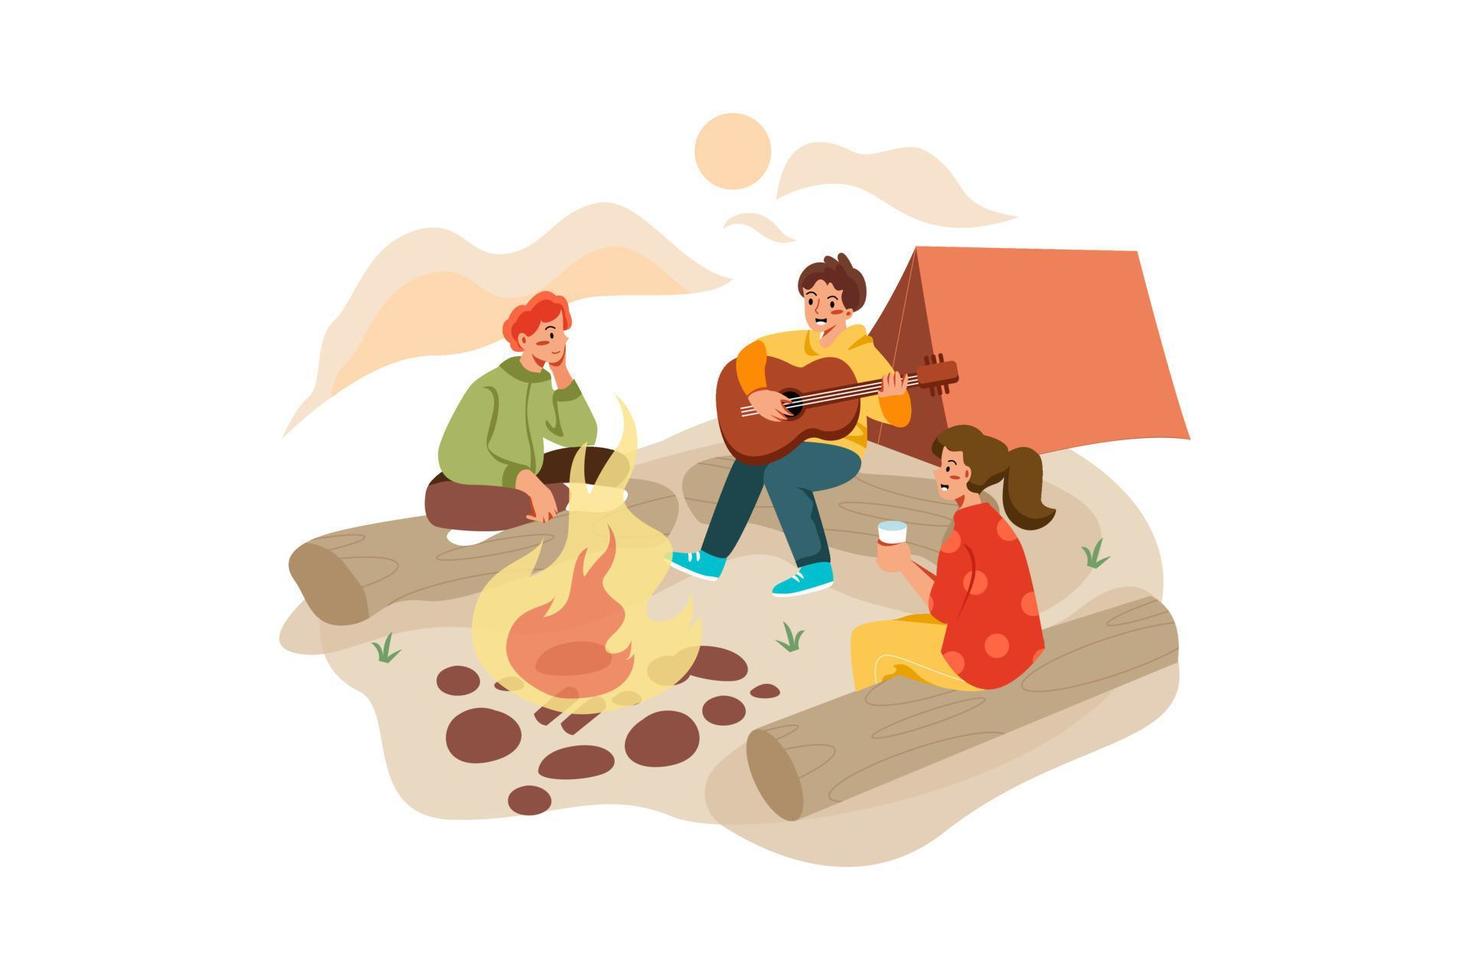 Camping Illustration Concept vector